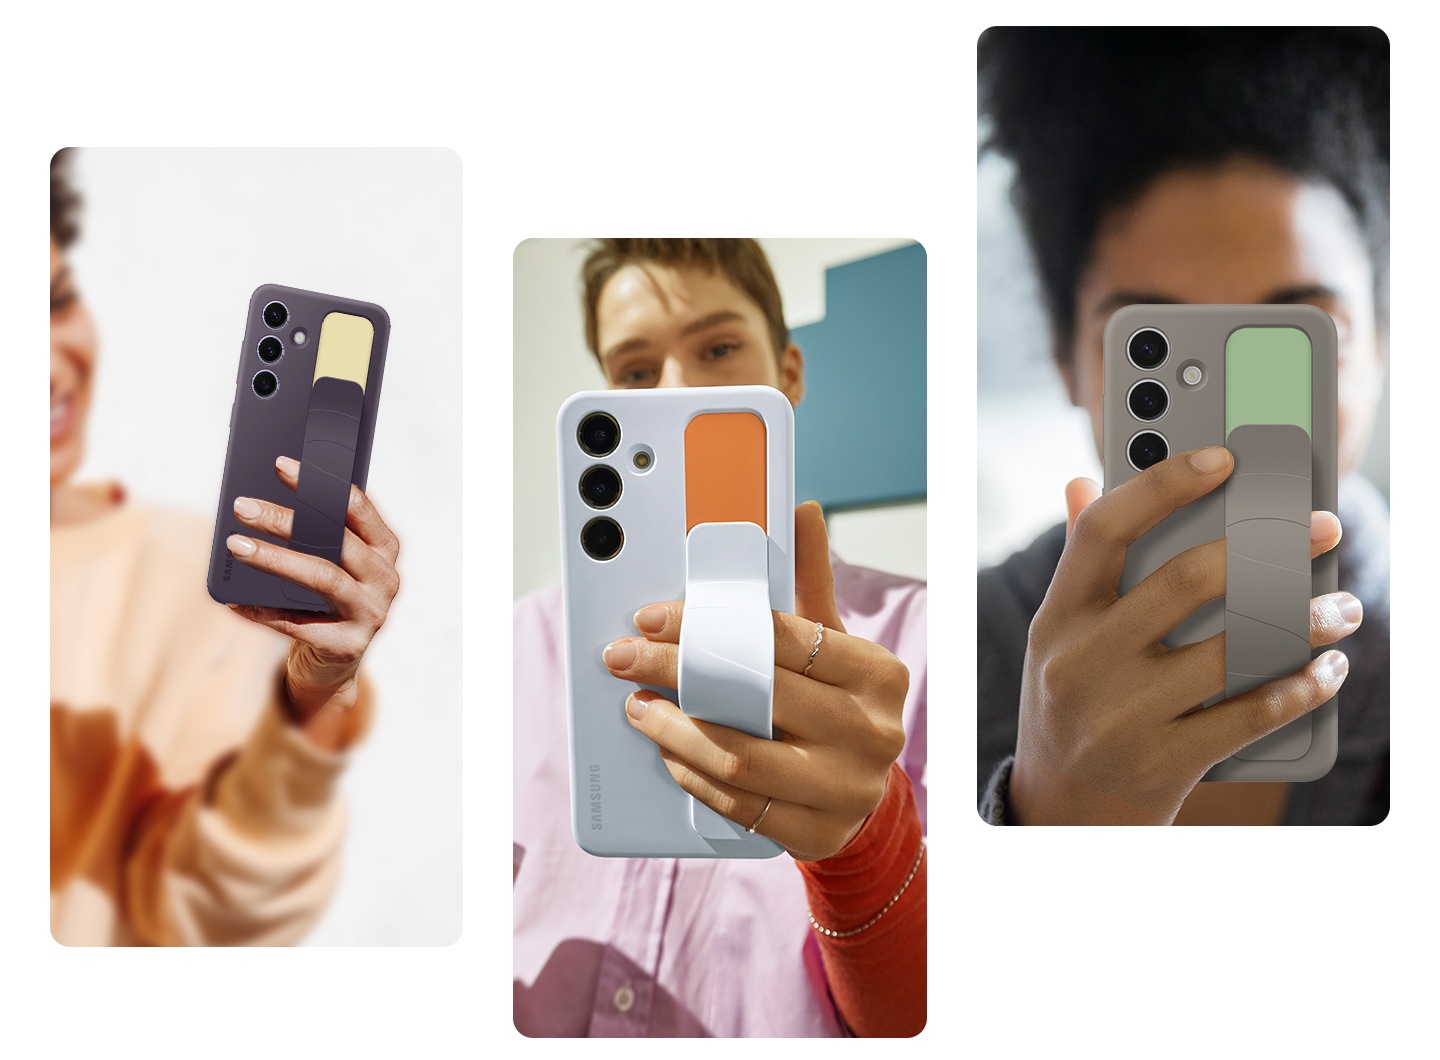 Three young people are holding the Strap of the Standing Grip Case in dark violet, light blue and taupe from left to right. Each person shows the ease of holding the phone as a right-handed or left-handed user, showcasing various lifestyle shots in different colors.